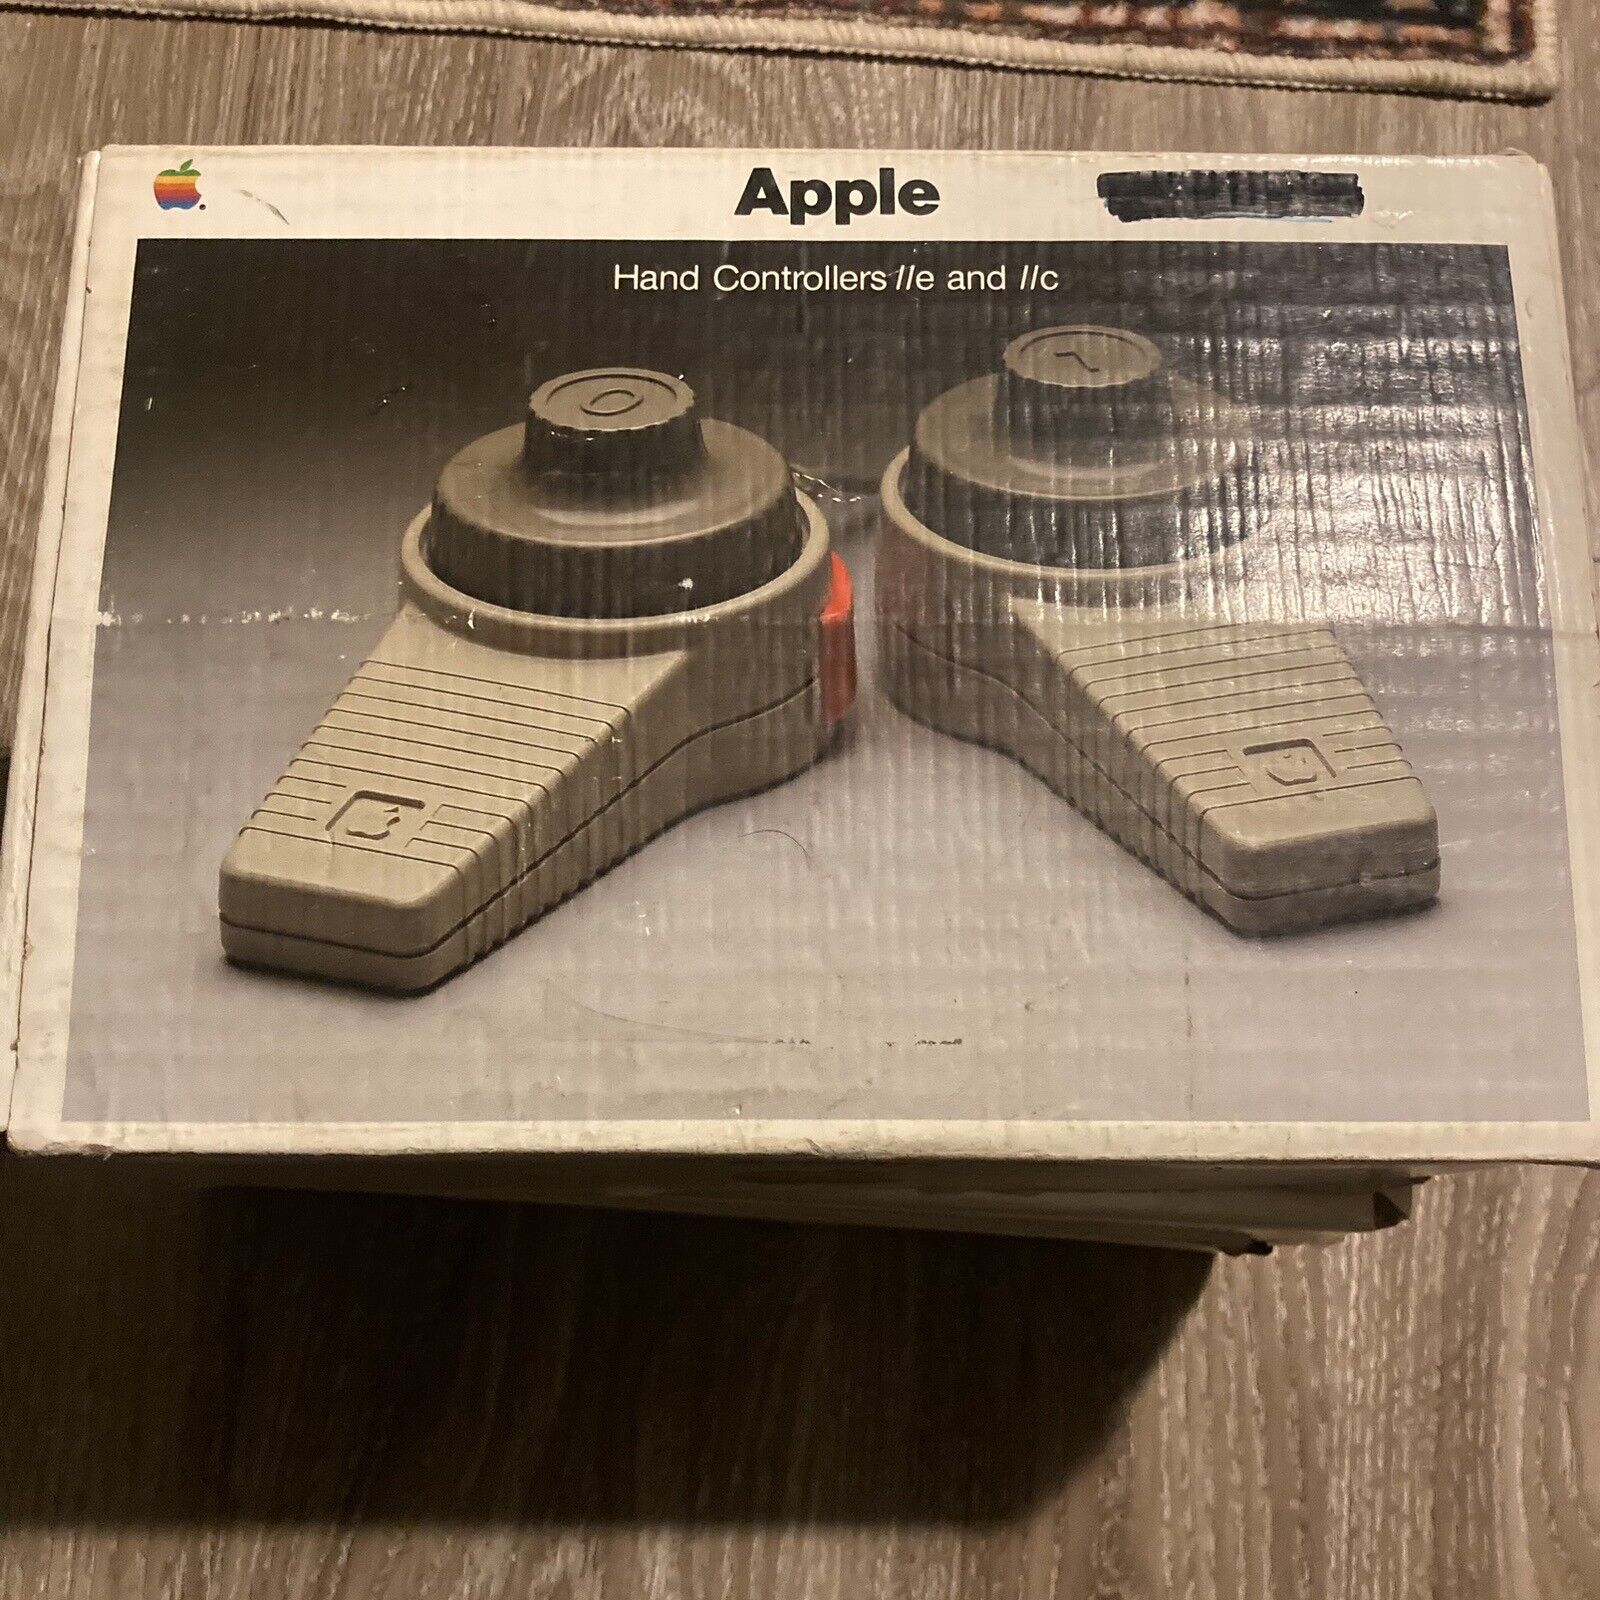 Vintage Apple iie Hand Controllers for Apple Model A2M2001